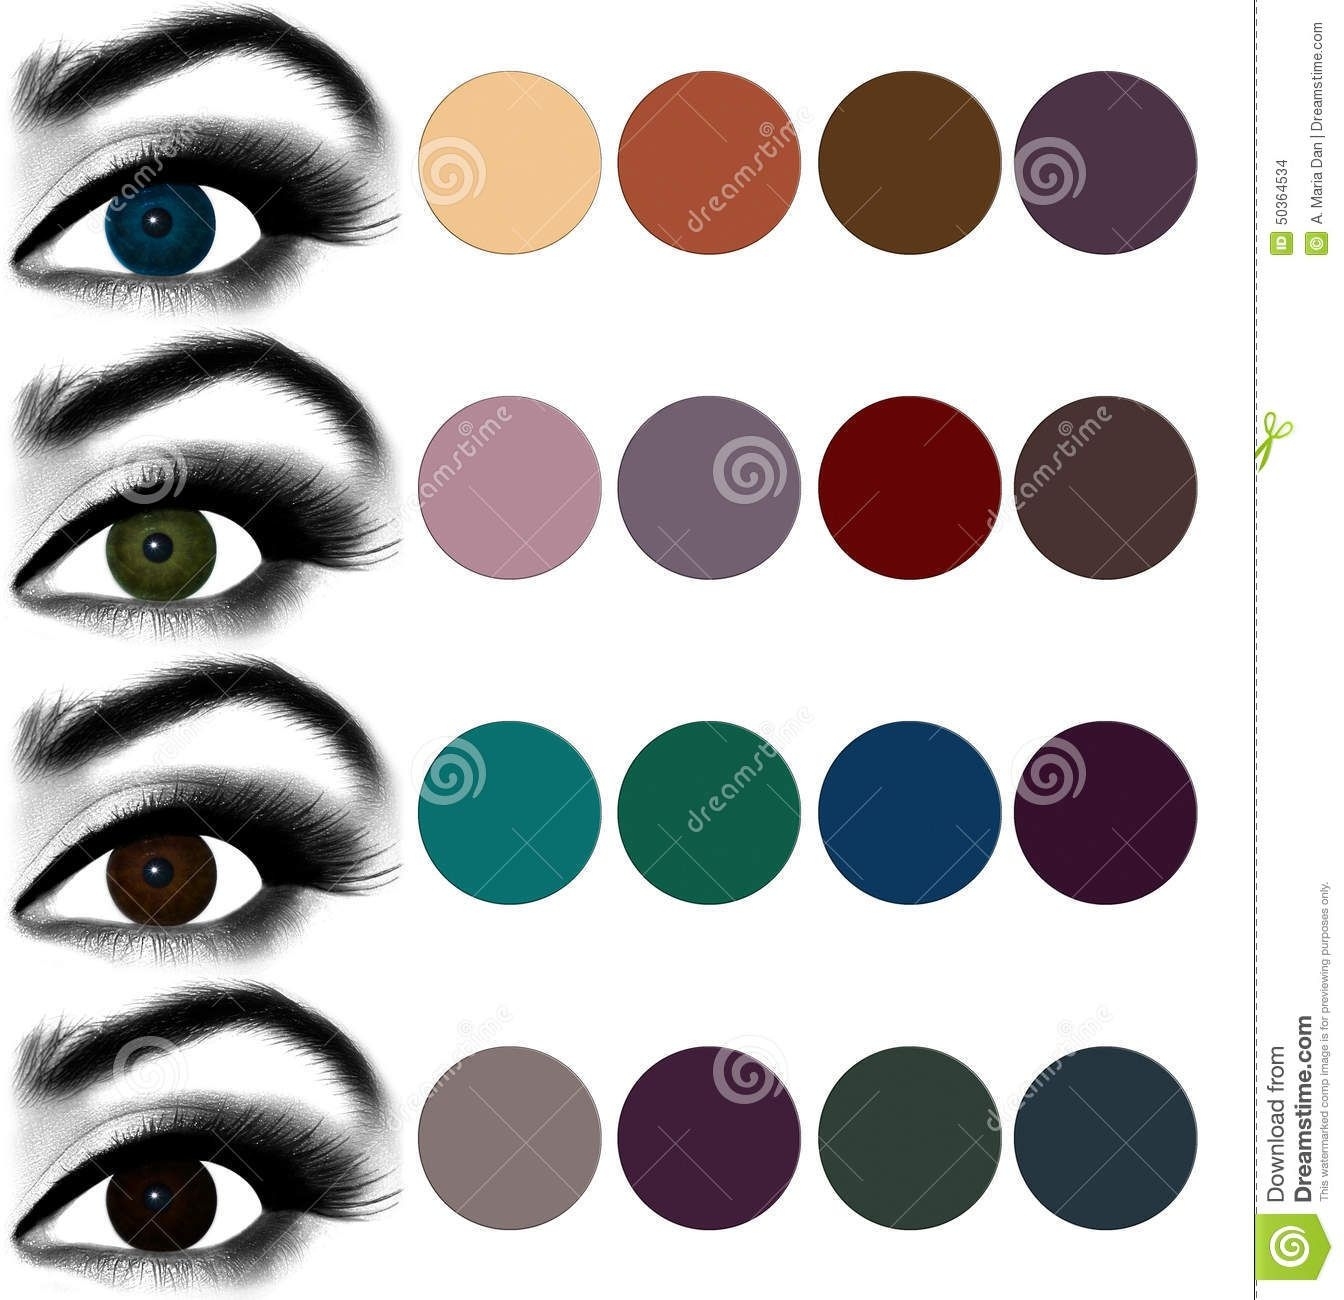 Eye Makeup For Green Eyes - Google Search | Make Up | Pinterest pertaining to What Colour Eye Makeup For Green Eyes